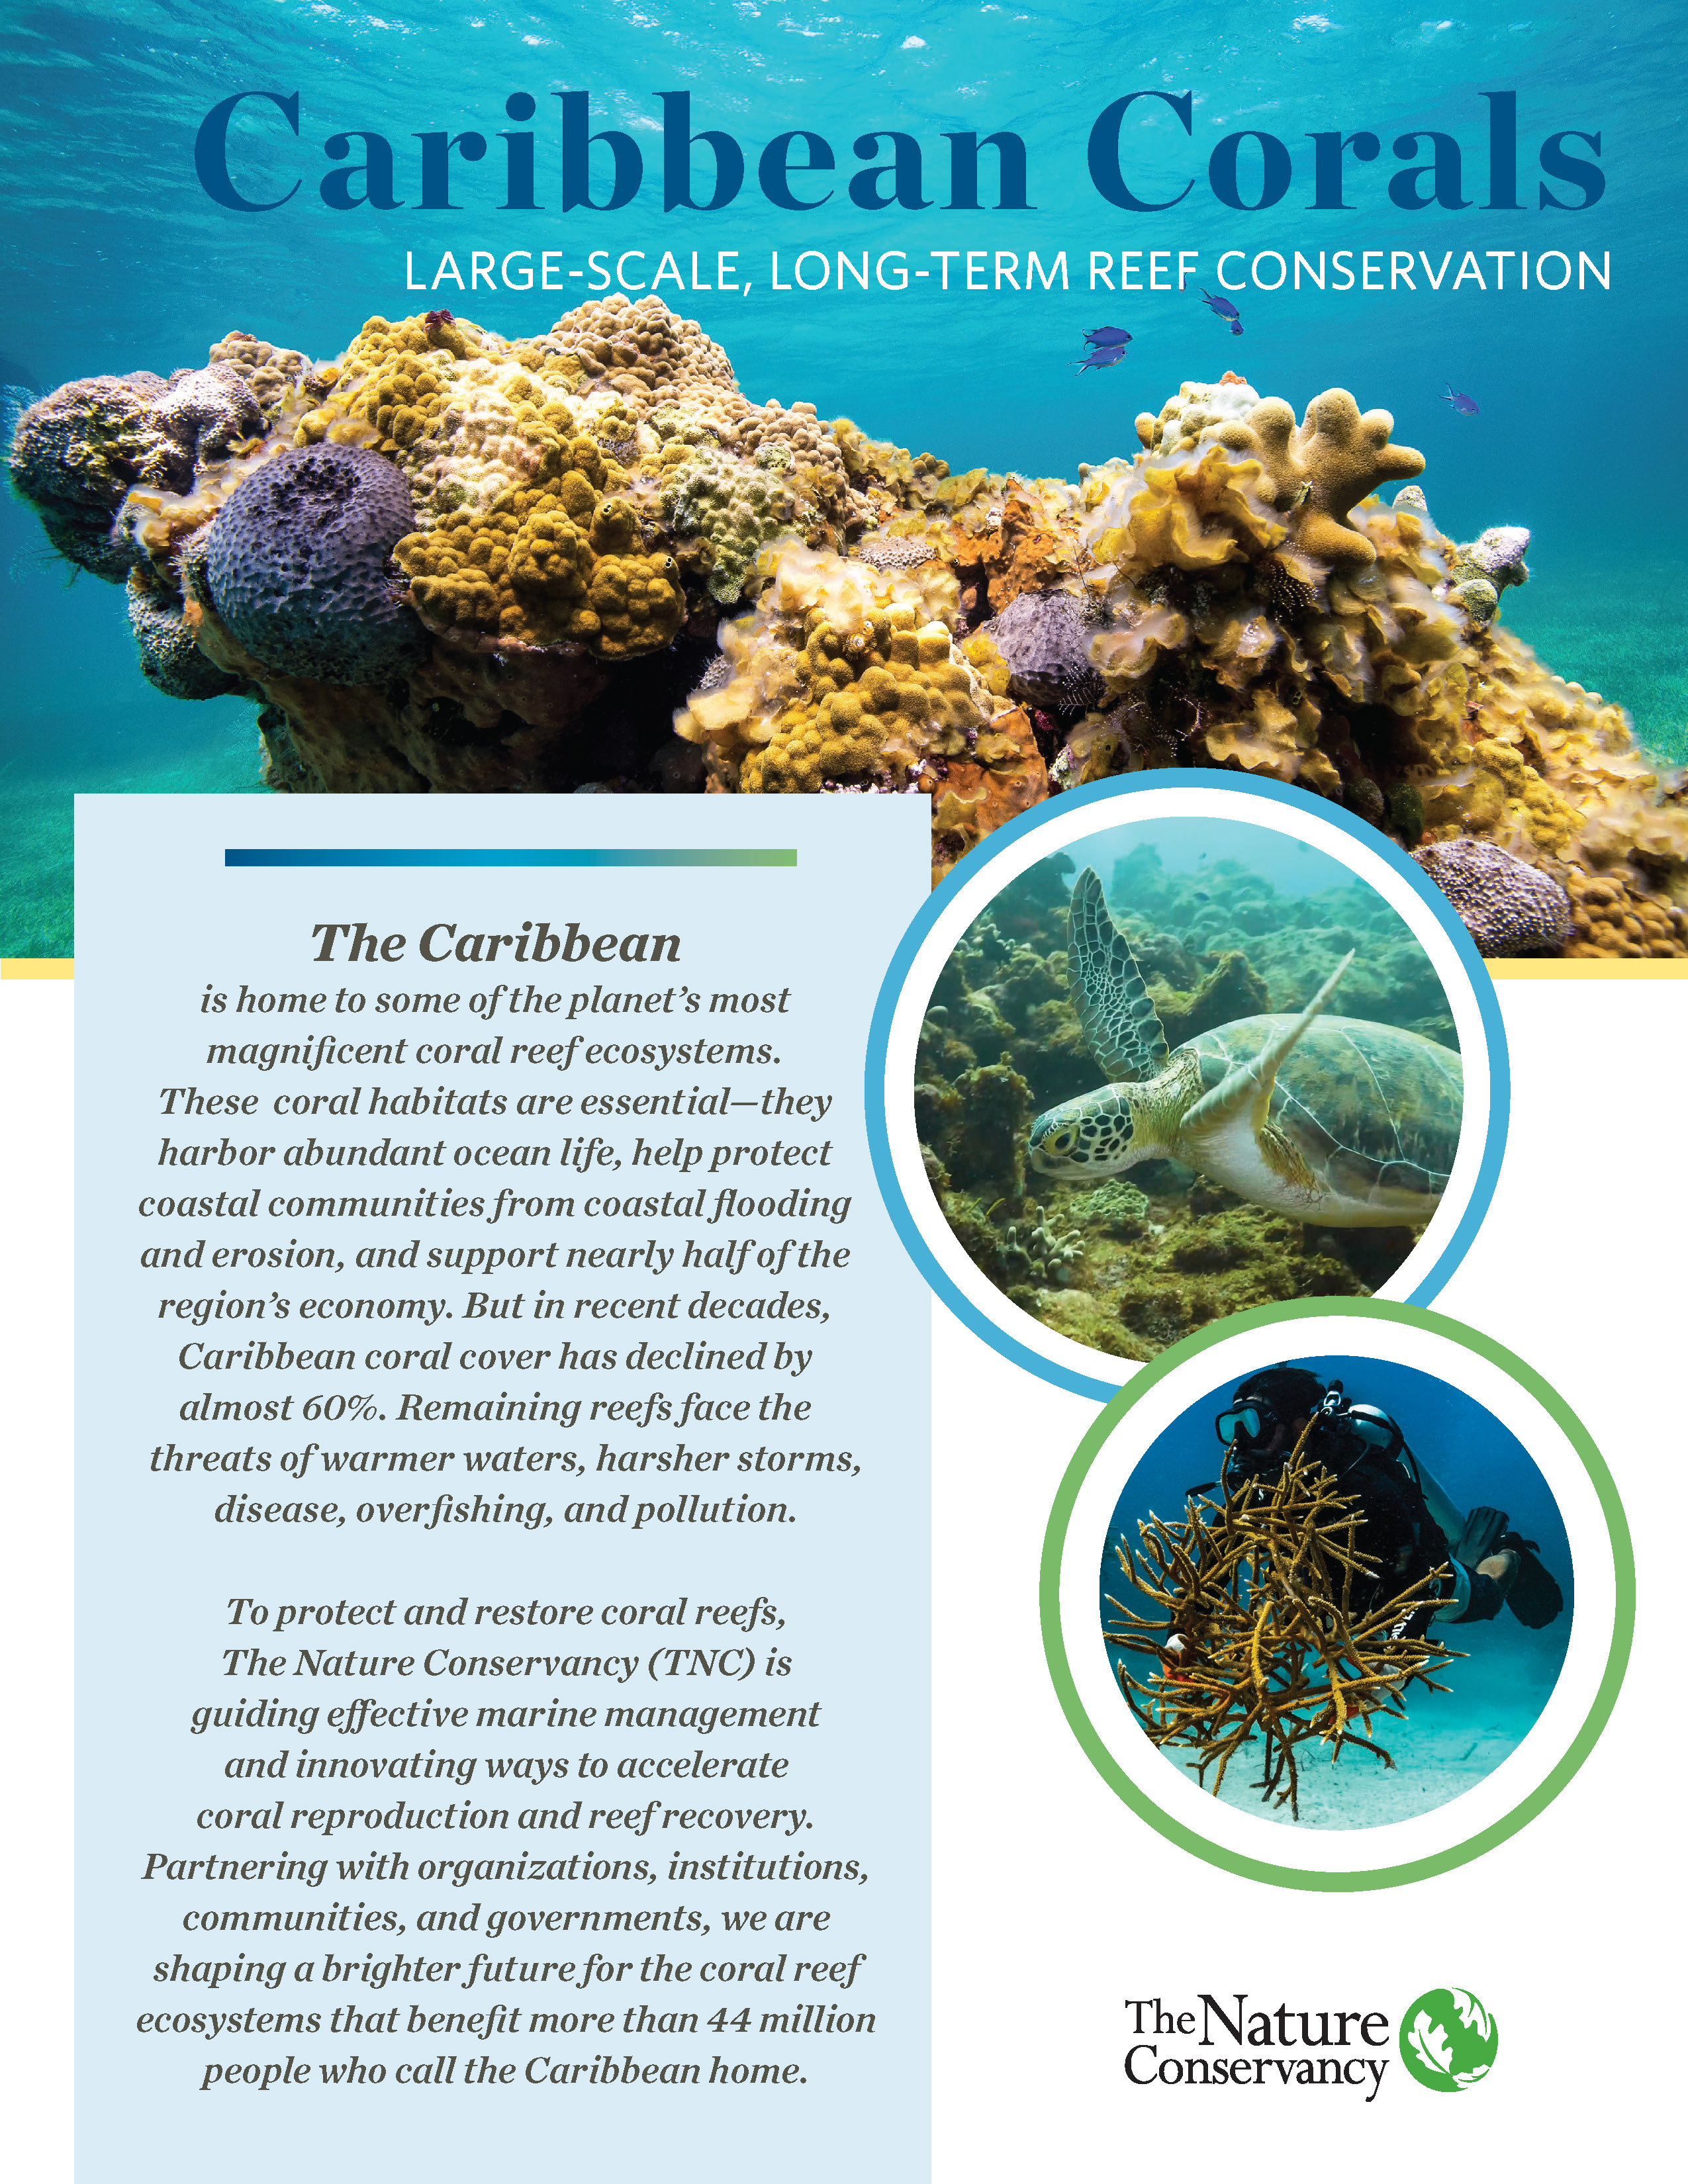 Restoring coral reefs benefits entire ecosystems and economies •